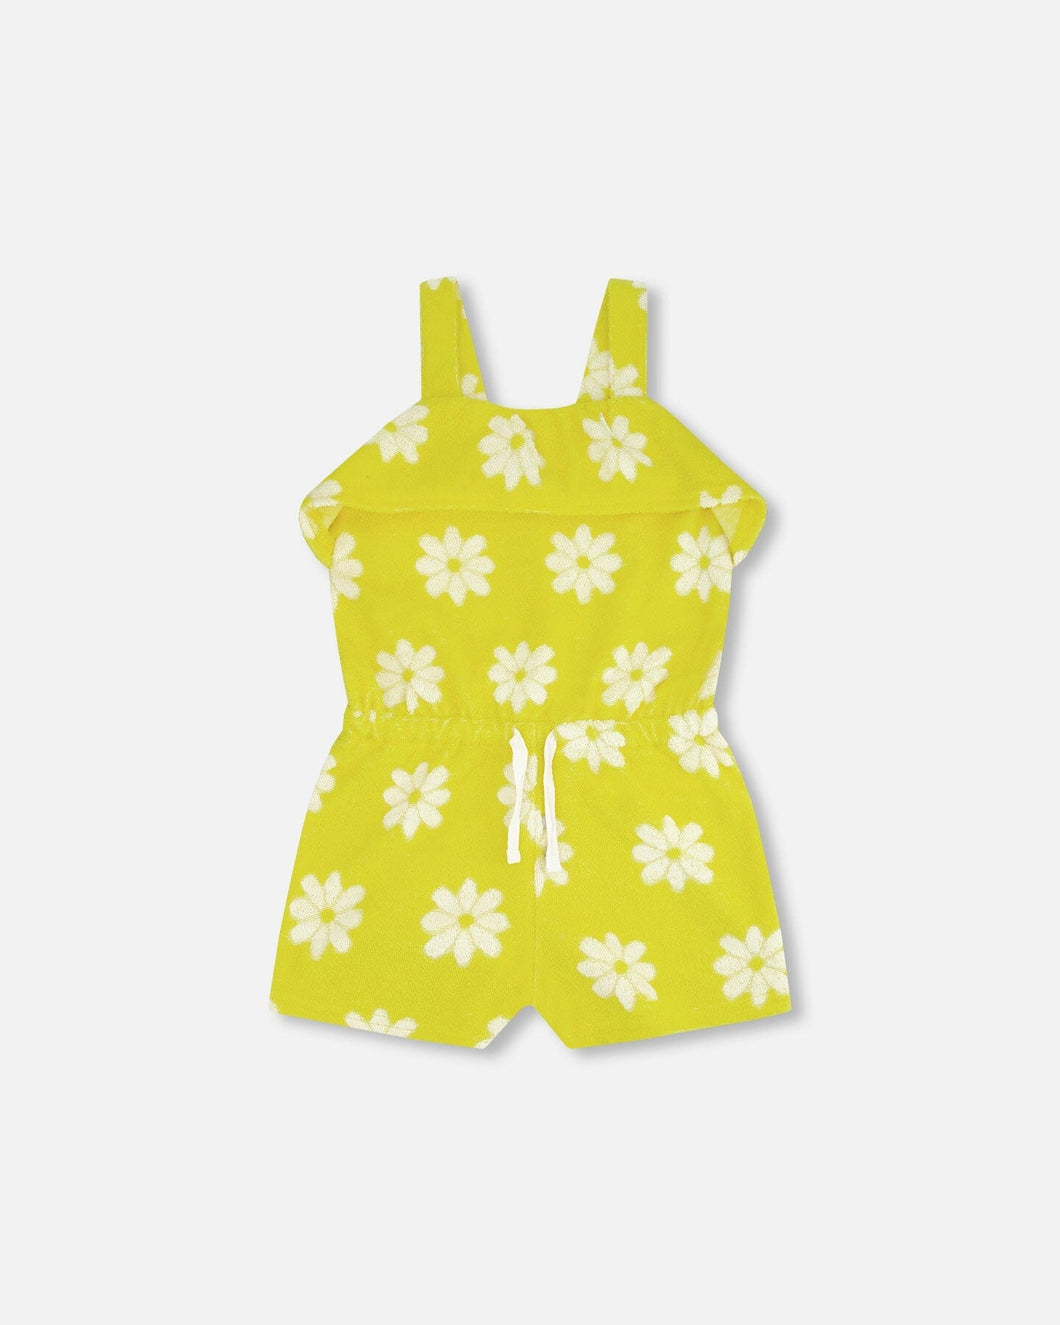 Yellow Daisies Terry Cloth Sleeveless Jumpsuit